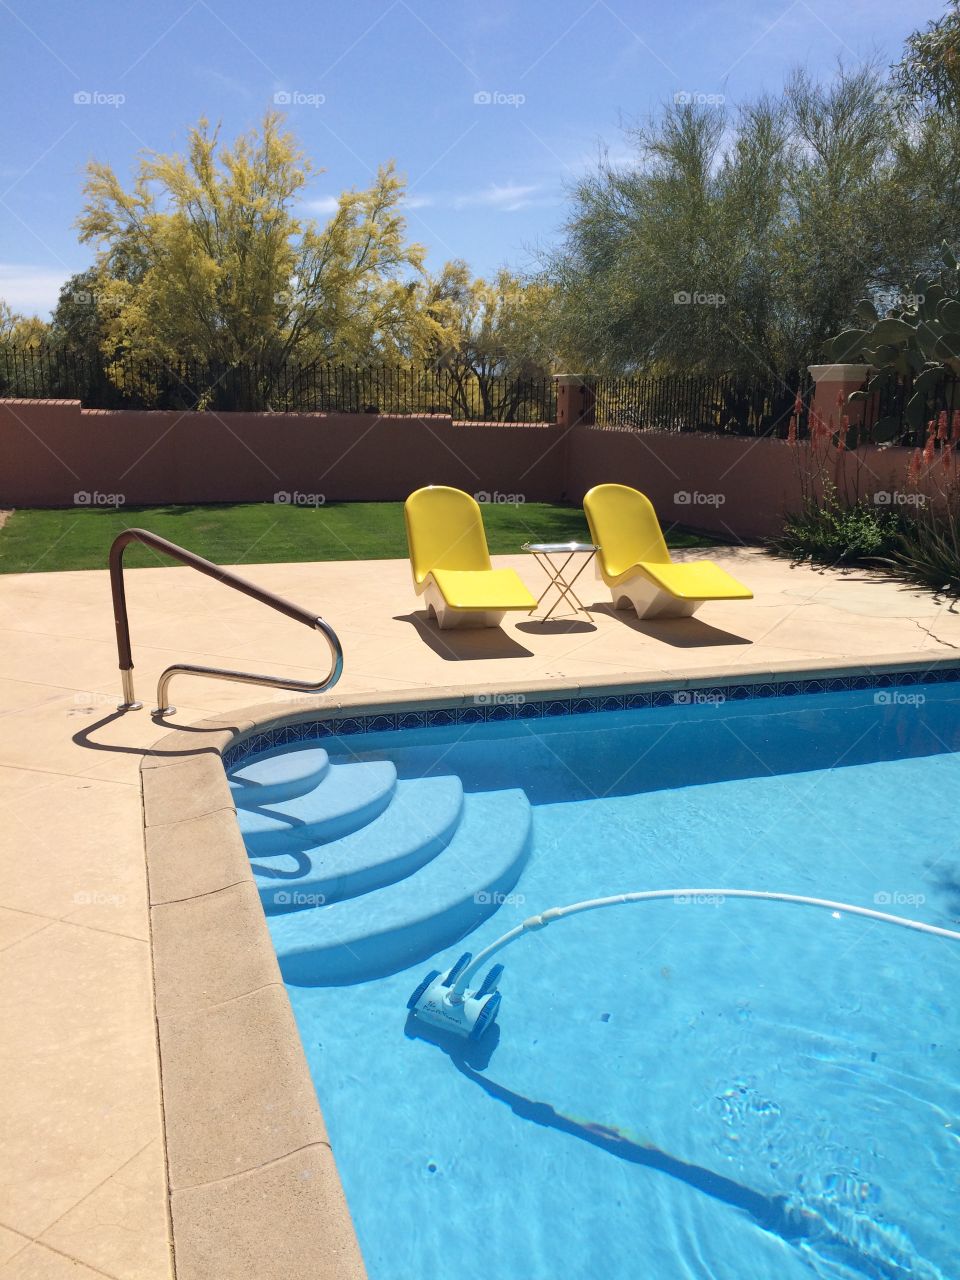 Poolside in the Desert. Yellow chairs by the pool